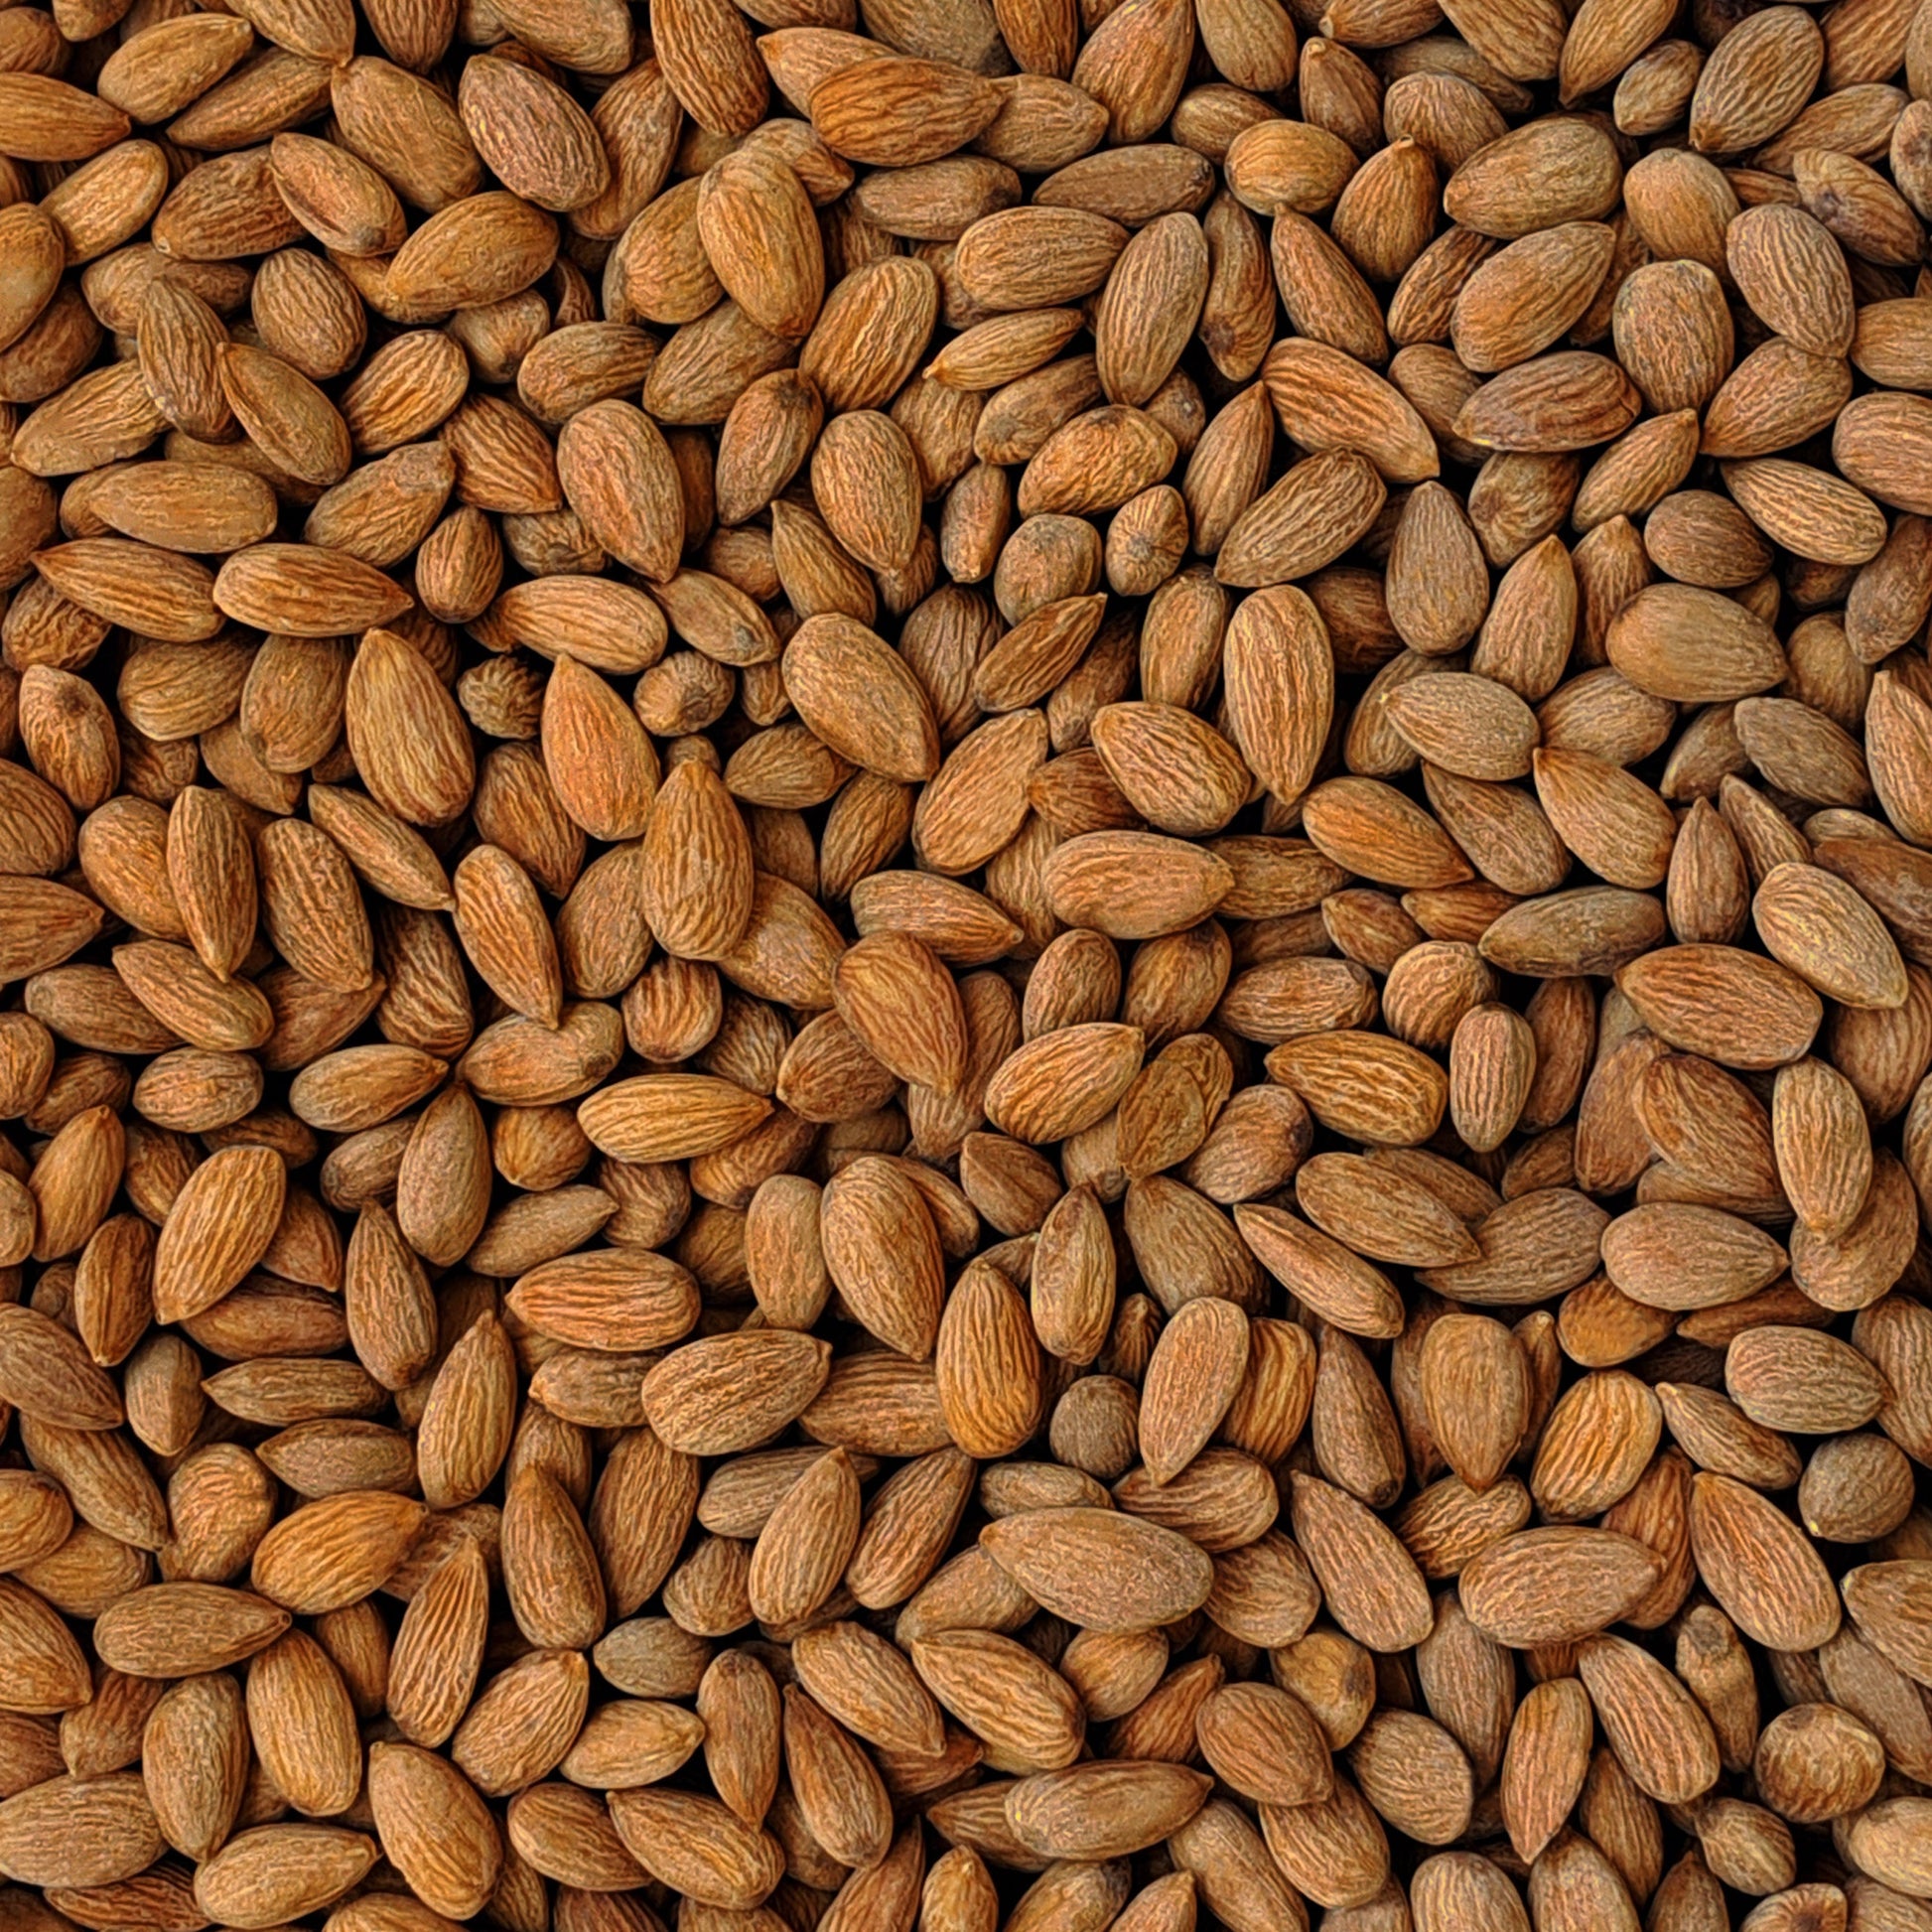 Full frame overhead image of BY NATURE Himalayan Rock Salt Almonds - raw, activated, dried not roasted.